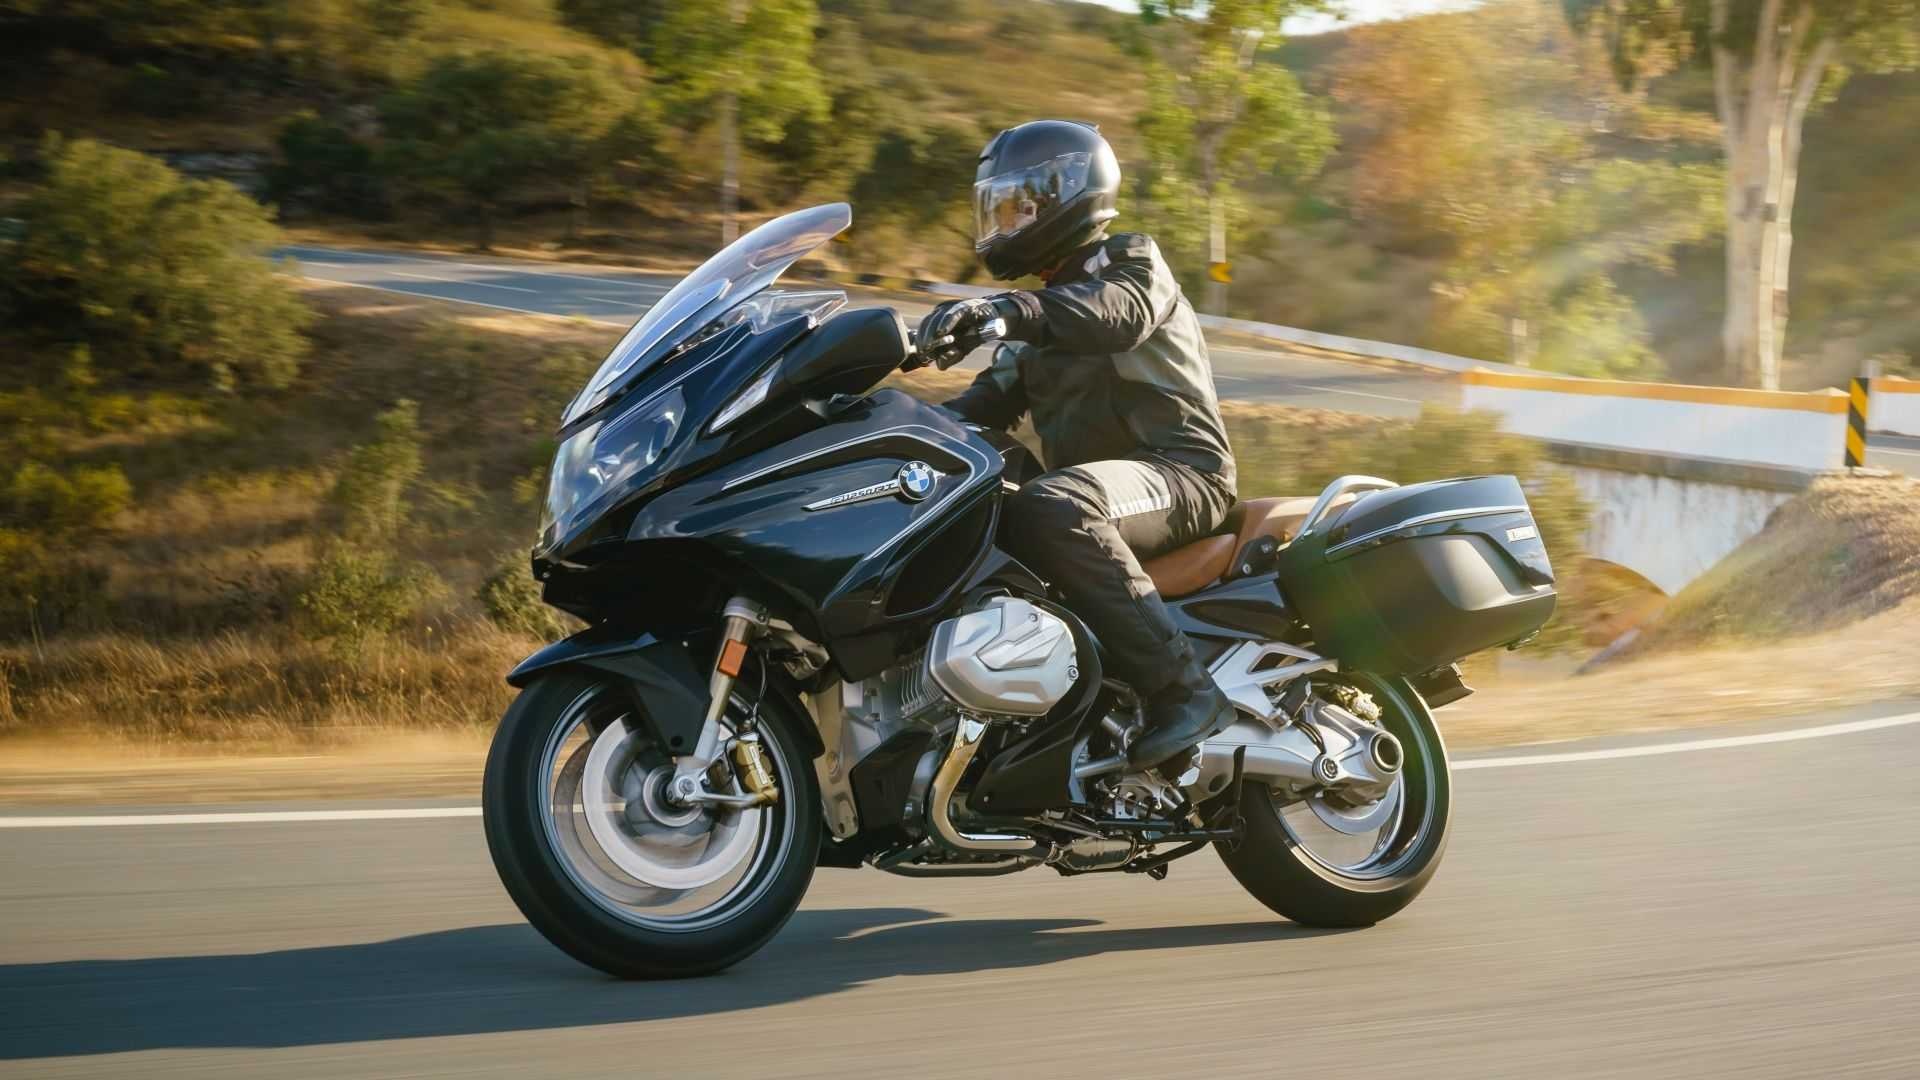 BMW R 1250 RT, Brazilian market launch, High-performance touring, Exciting release, 1920x1080 Full HD Desktop